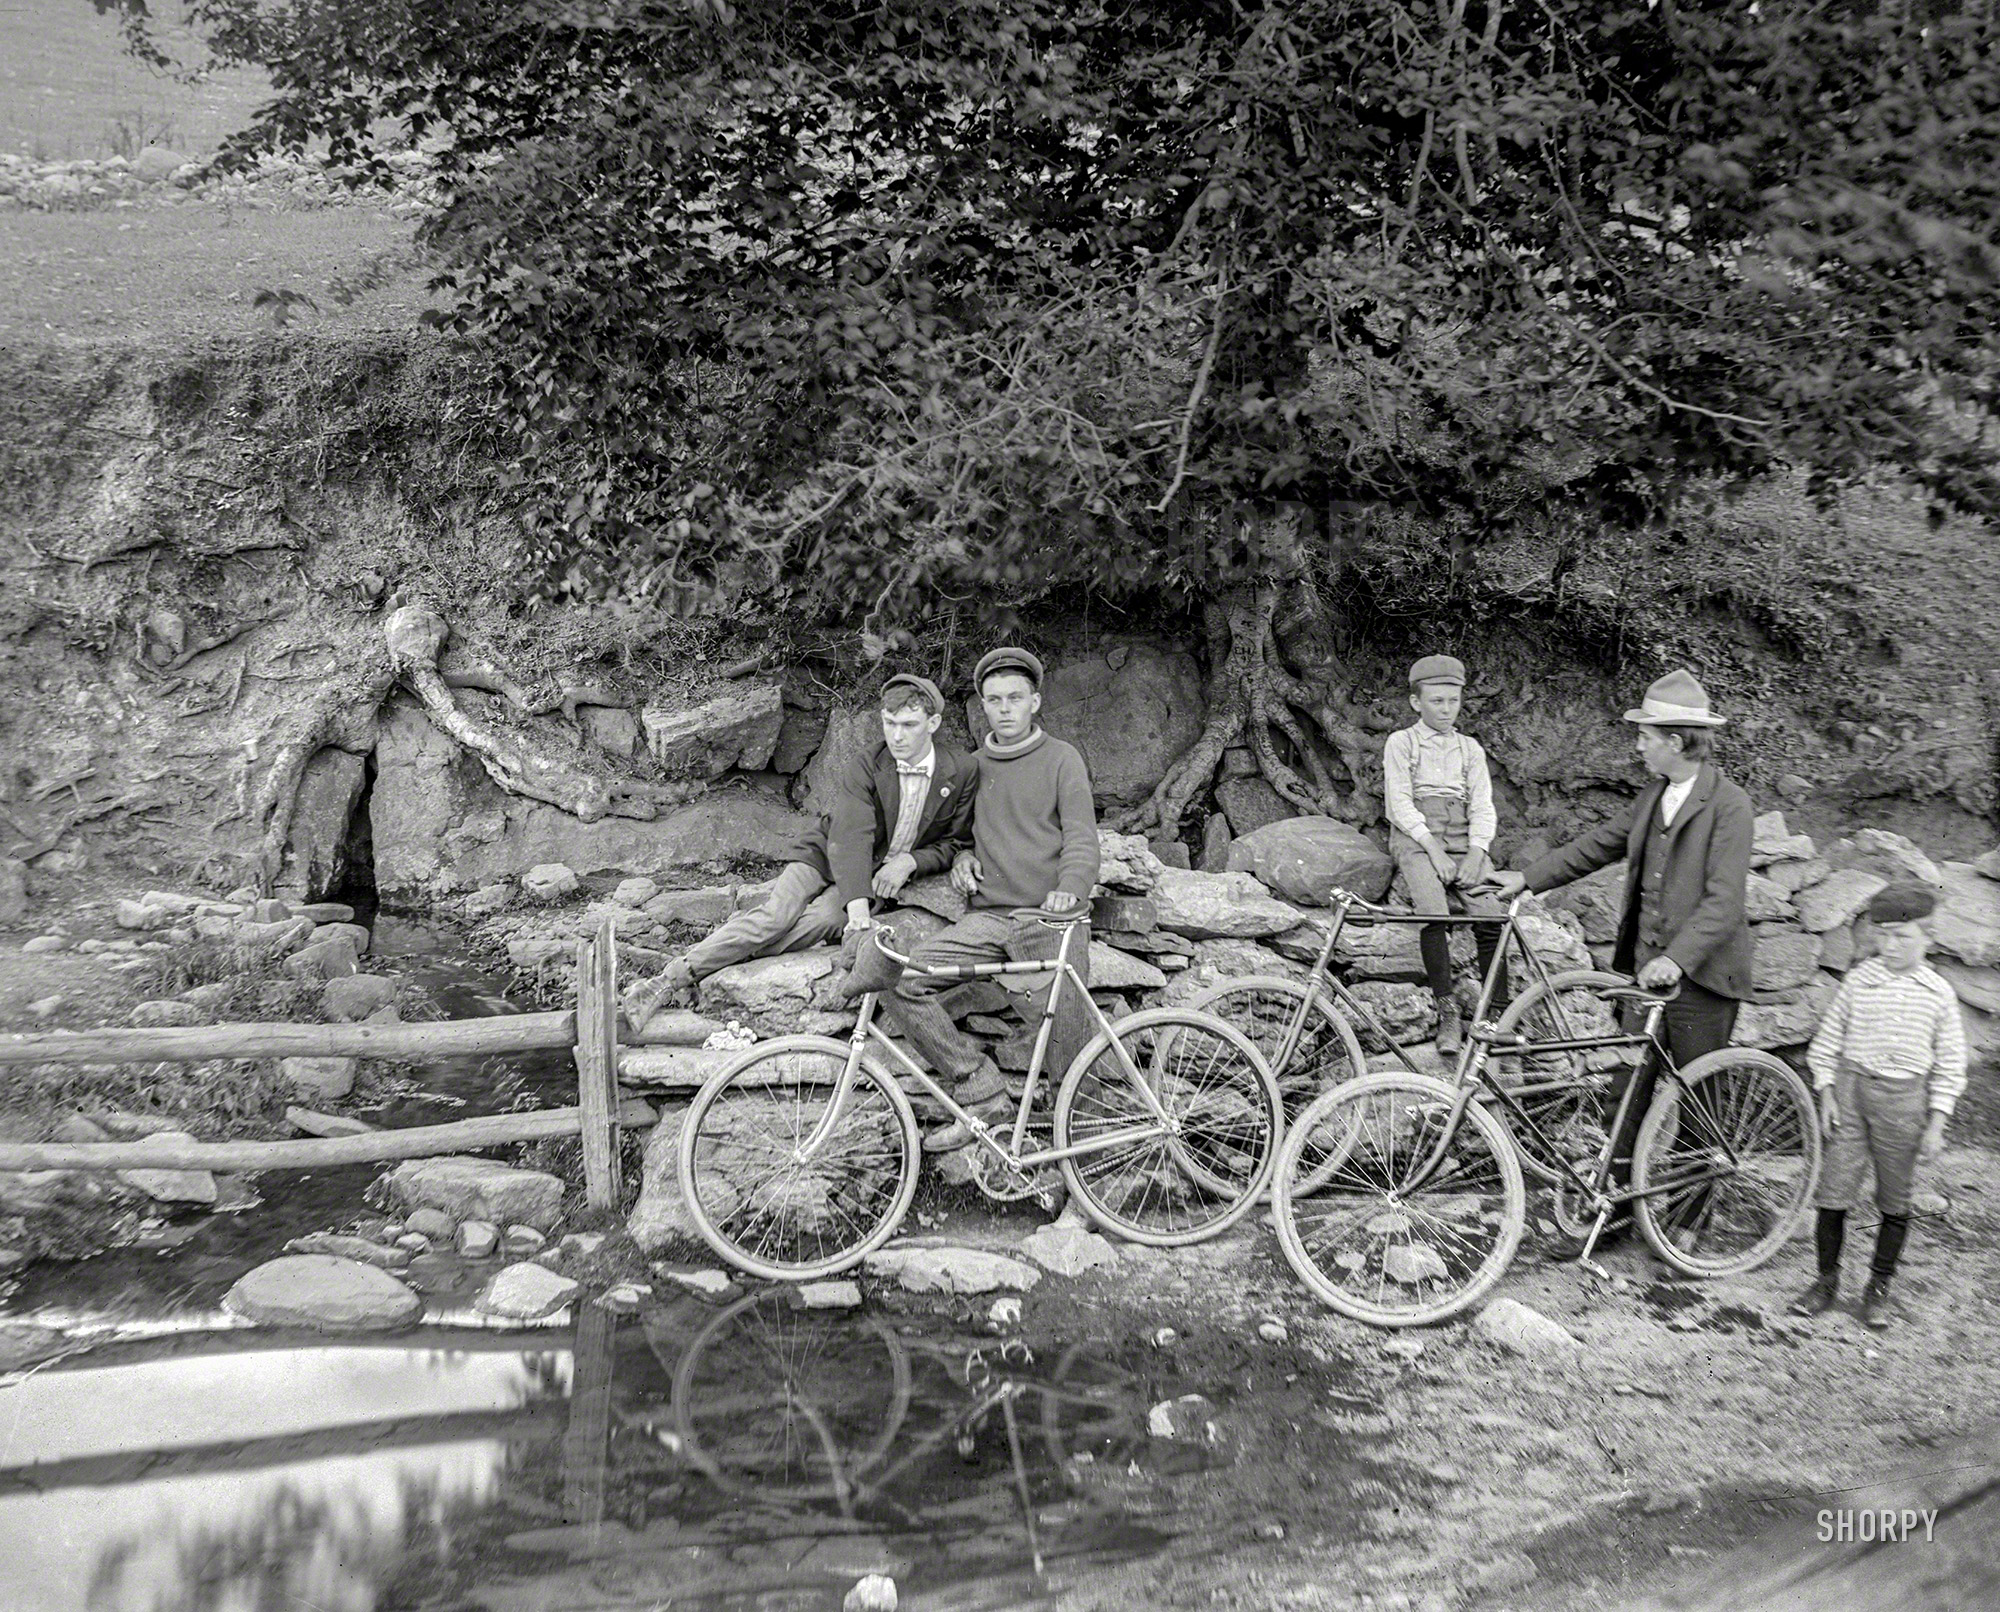 From the early 20th century, somewhere in the Northeast, comes this 4x5 inch glass negative with the caption "L.K. -- bicycles at spring." View full size.